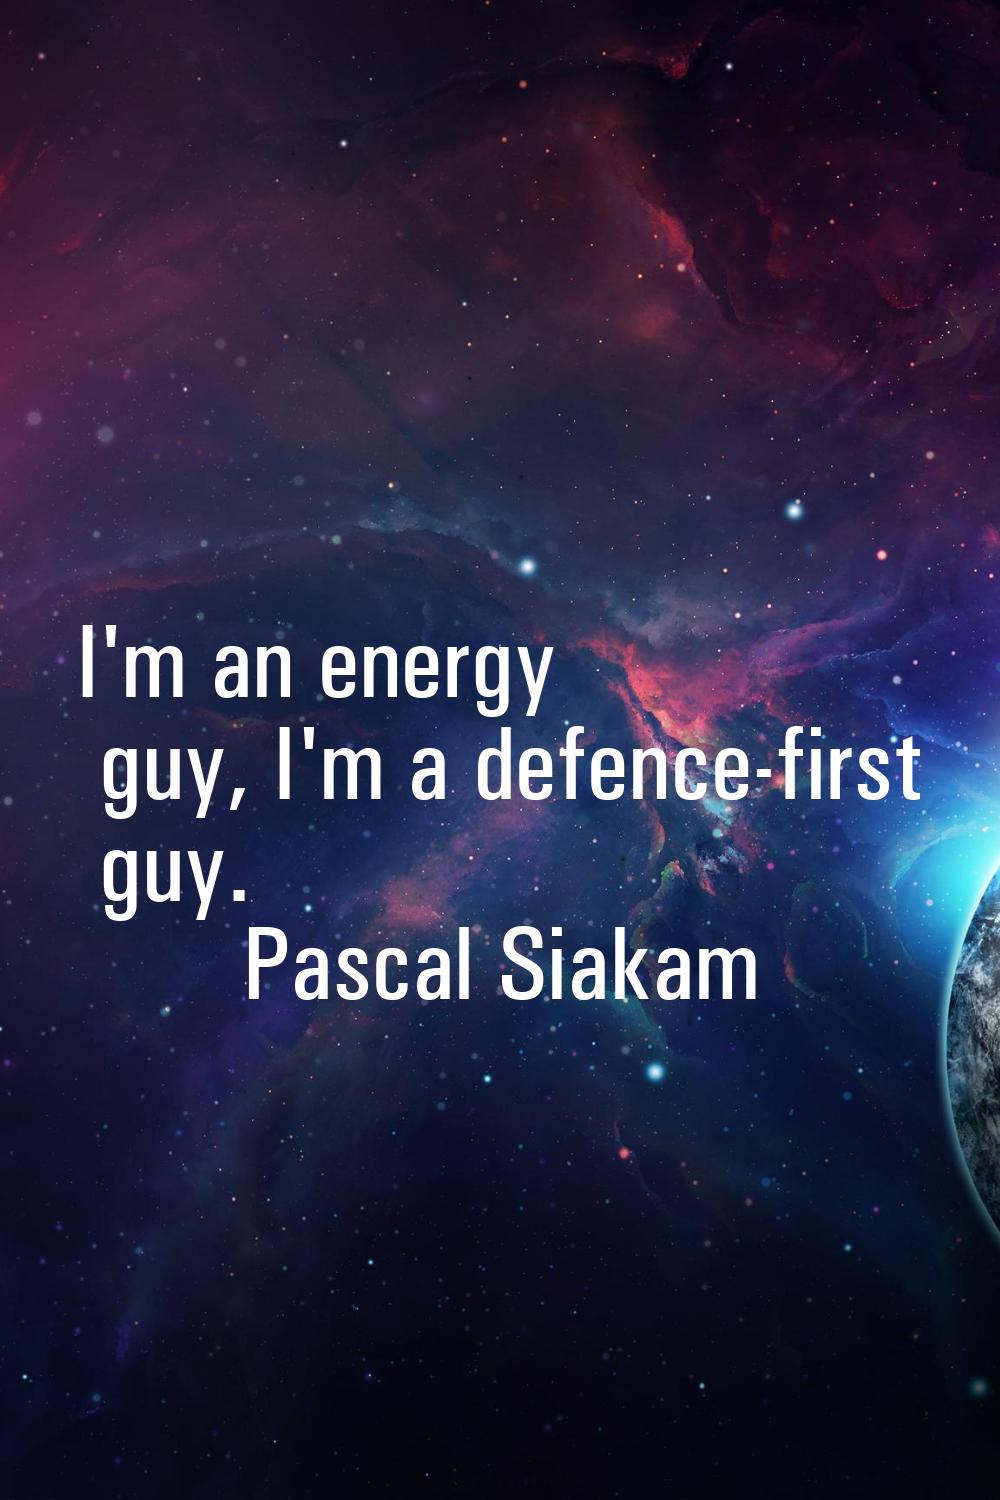 I'm an energy guy, I'm a defence-first guy.